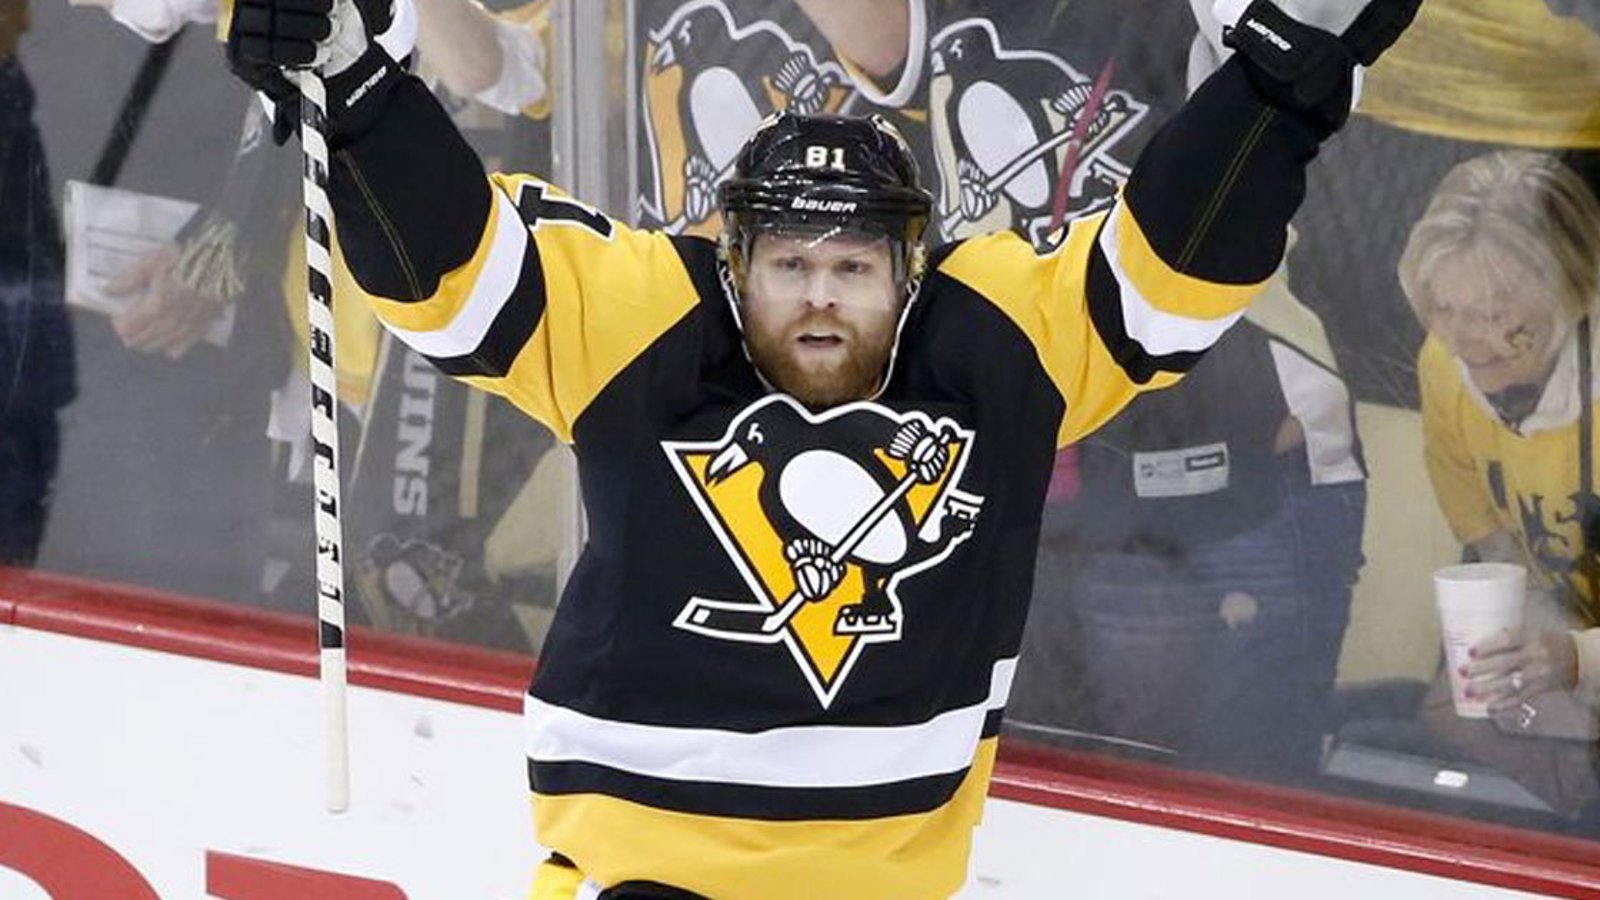 Must see: Kessel tries to prove he can ball